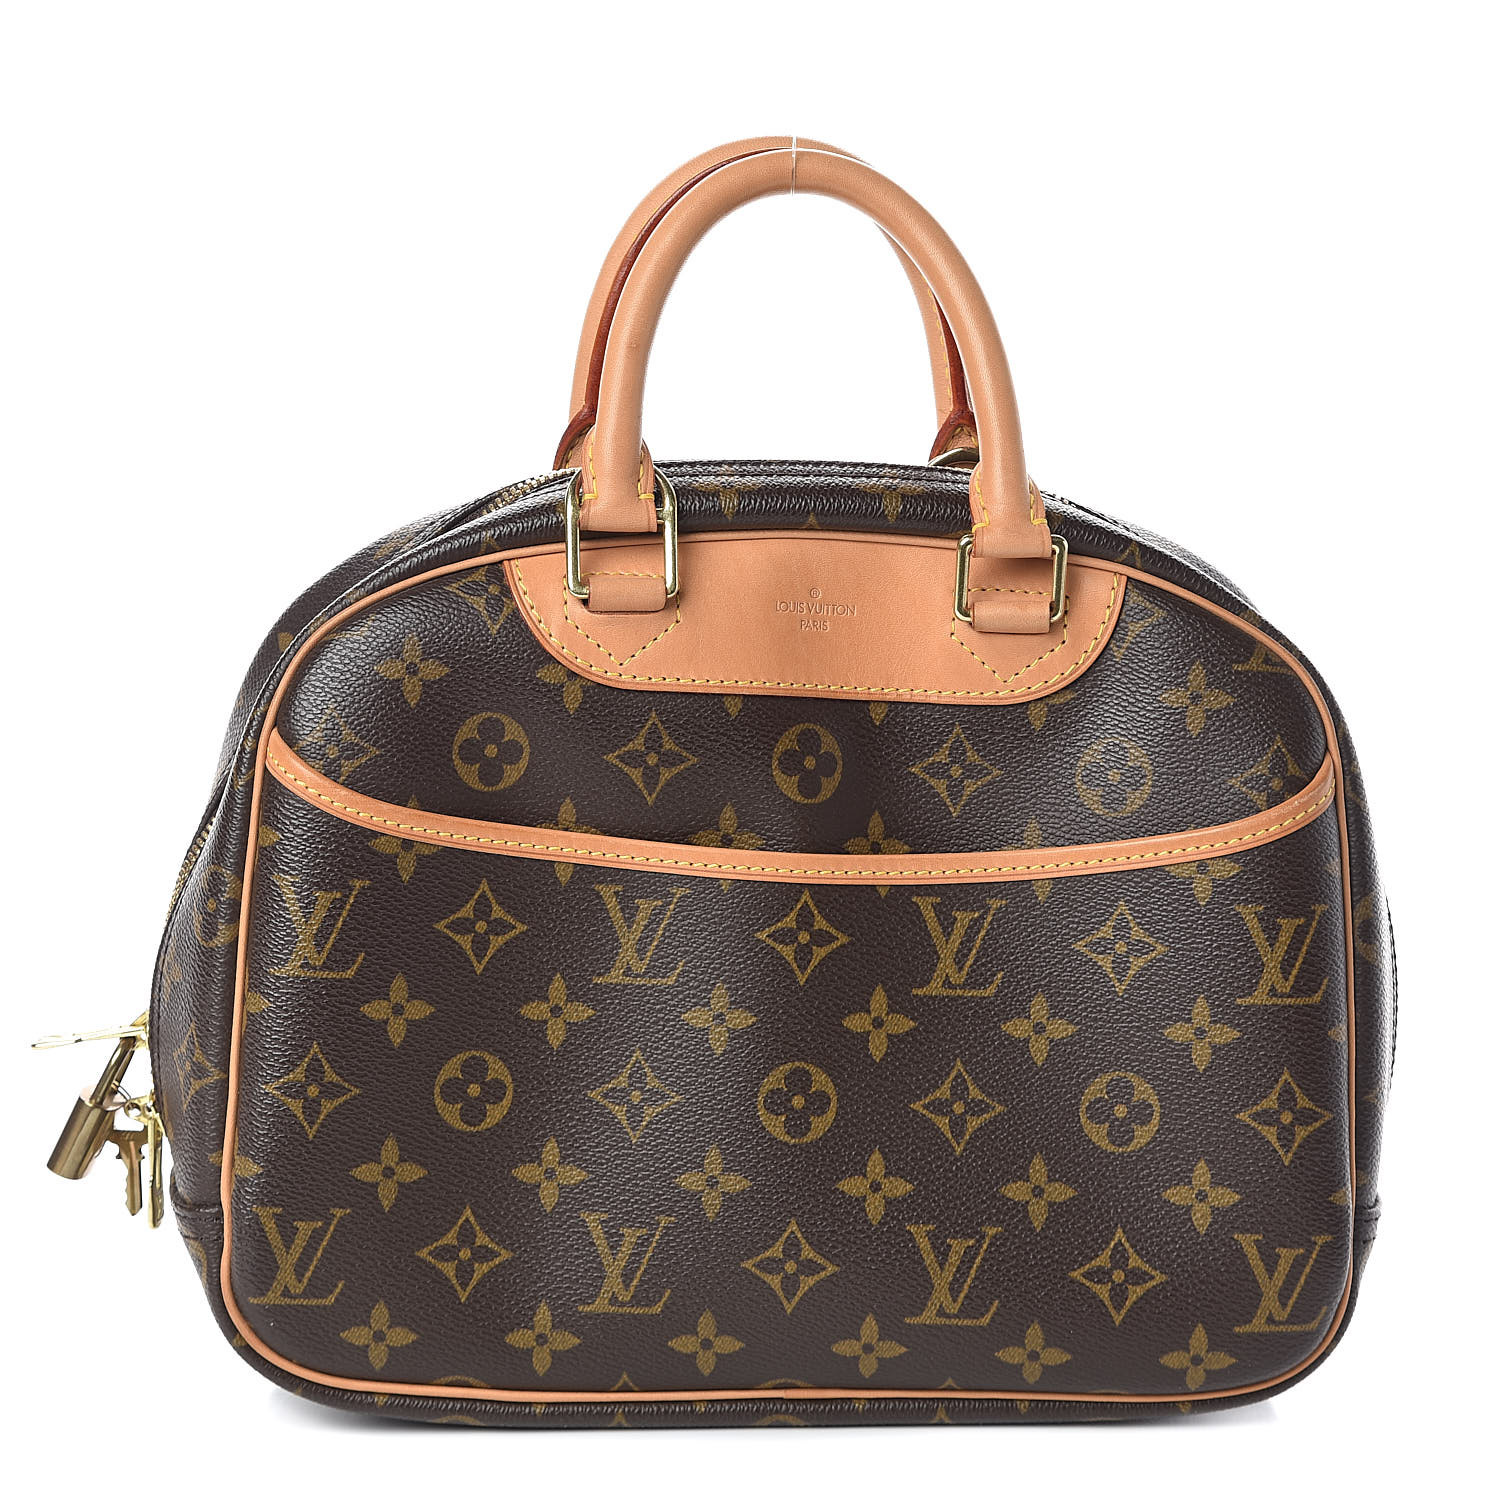 Louis Vuitton Purses, Bags & Accessories - Couture USA Tagged Epi Leather